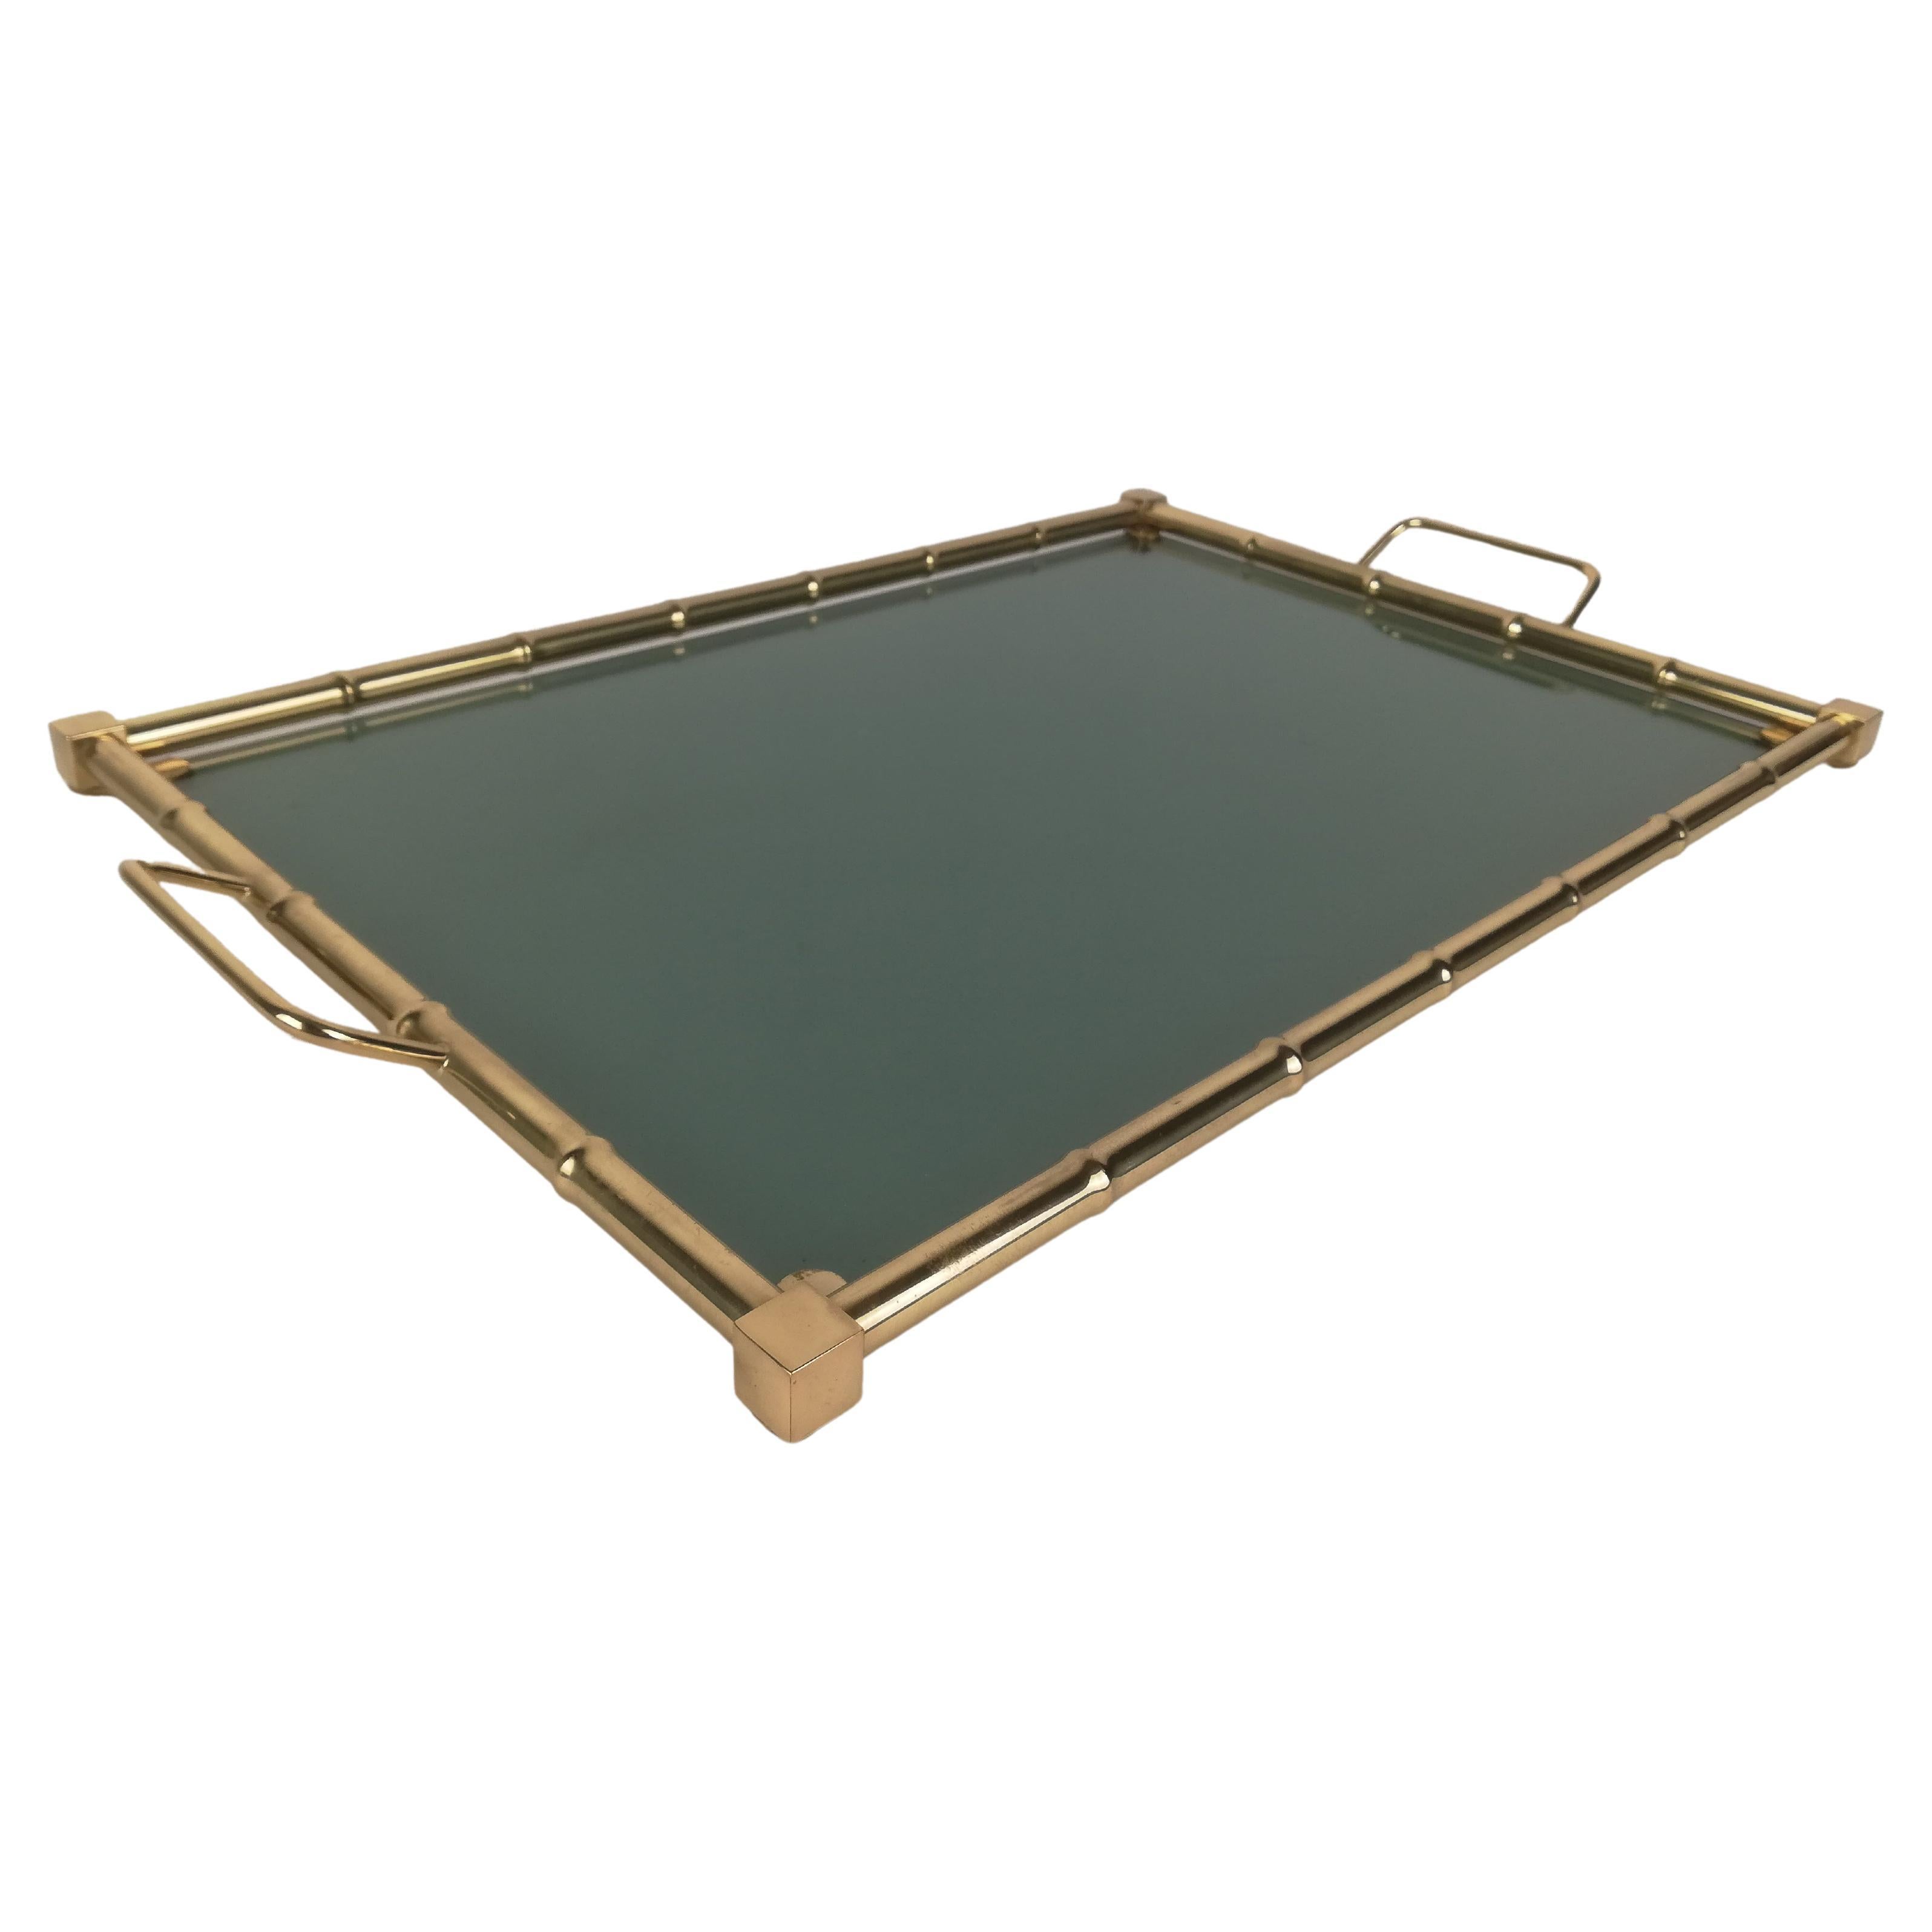 Hollywood Regency Italian Tray in Brass Faux Bamboo and Fumè Glass, 1970s For Sale